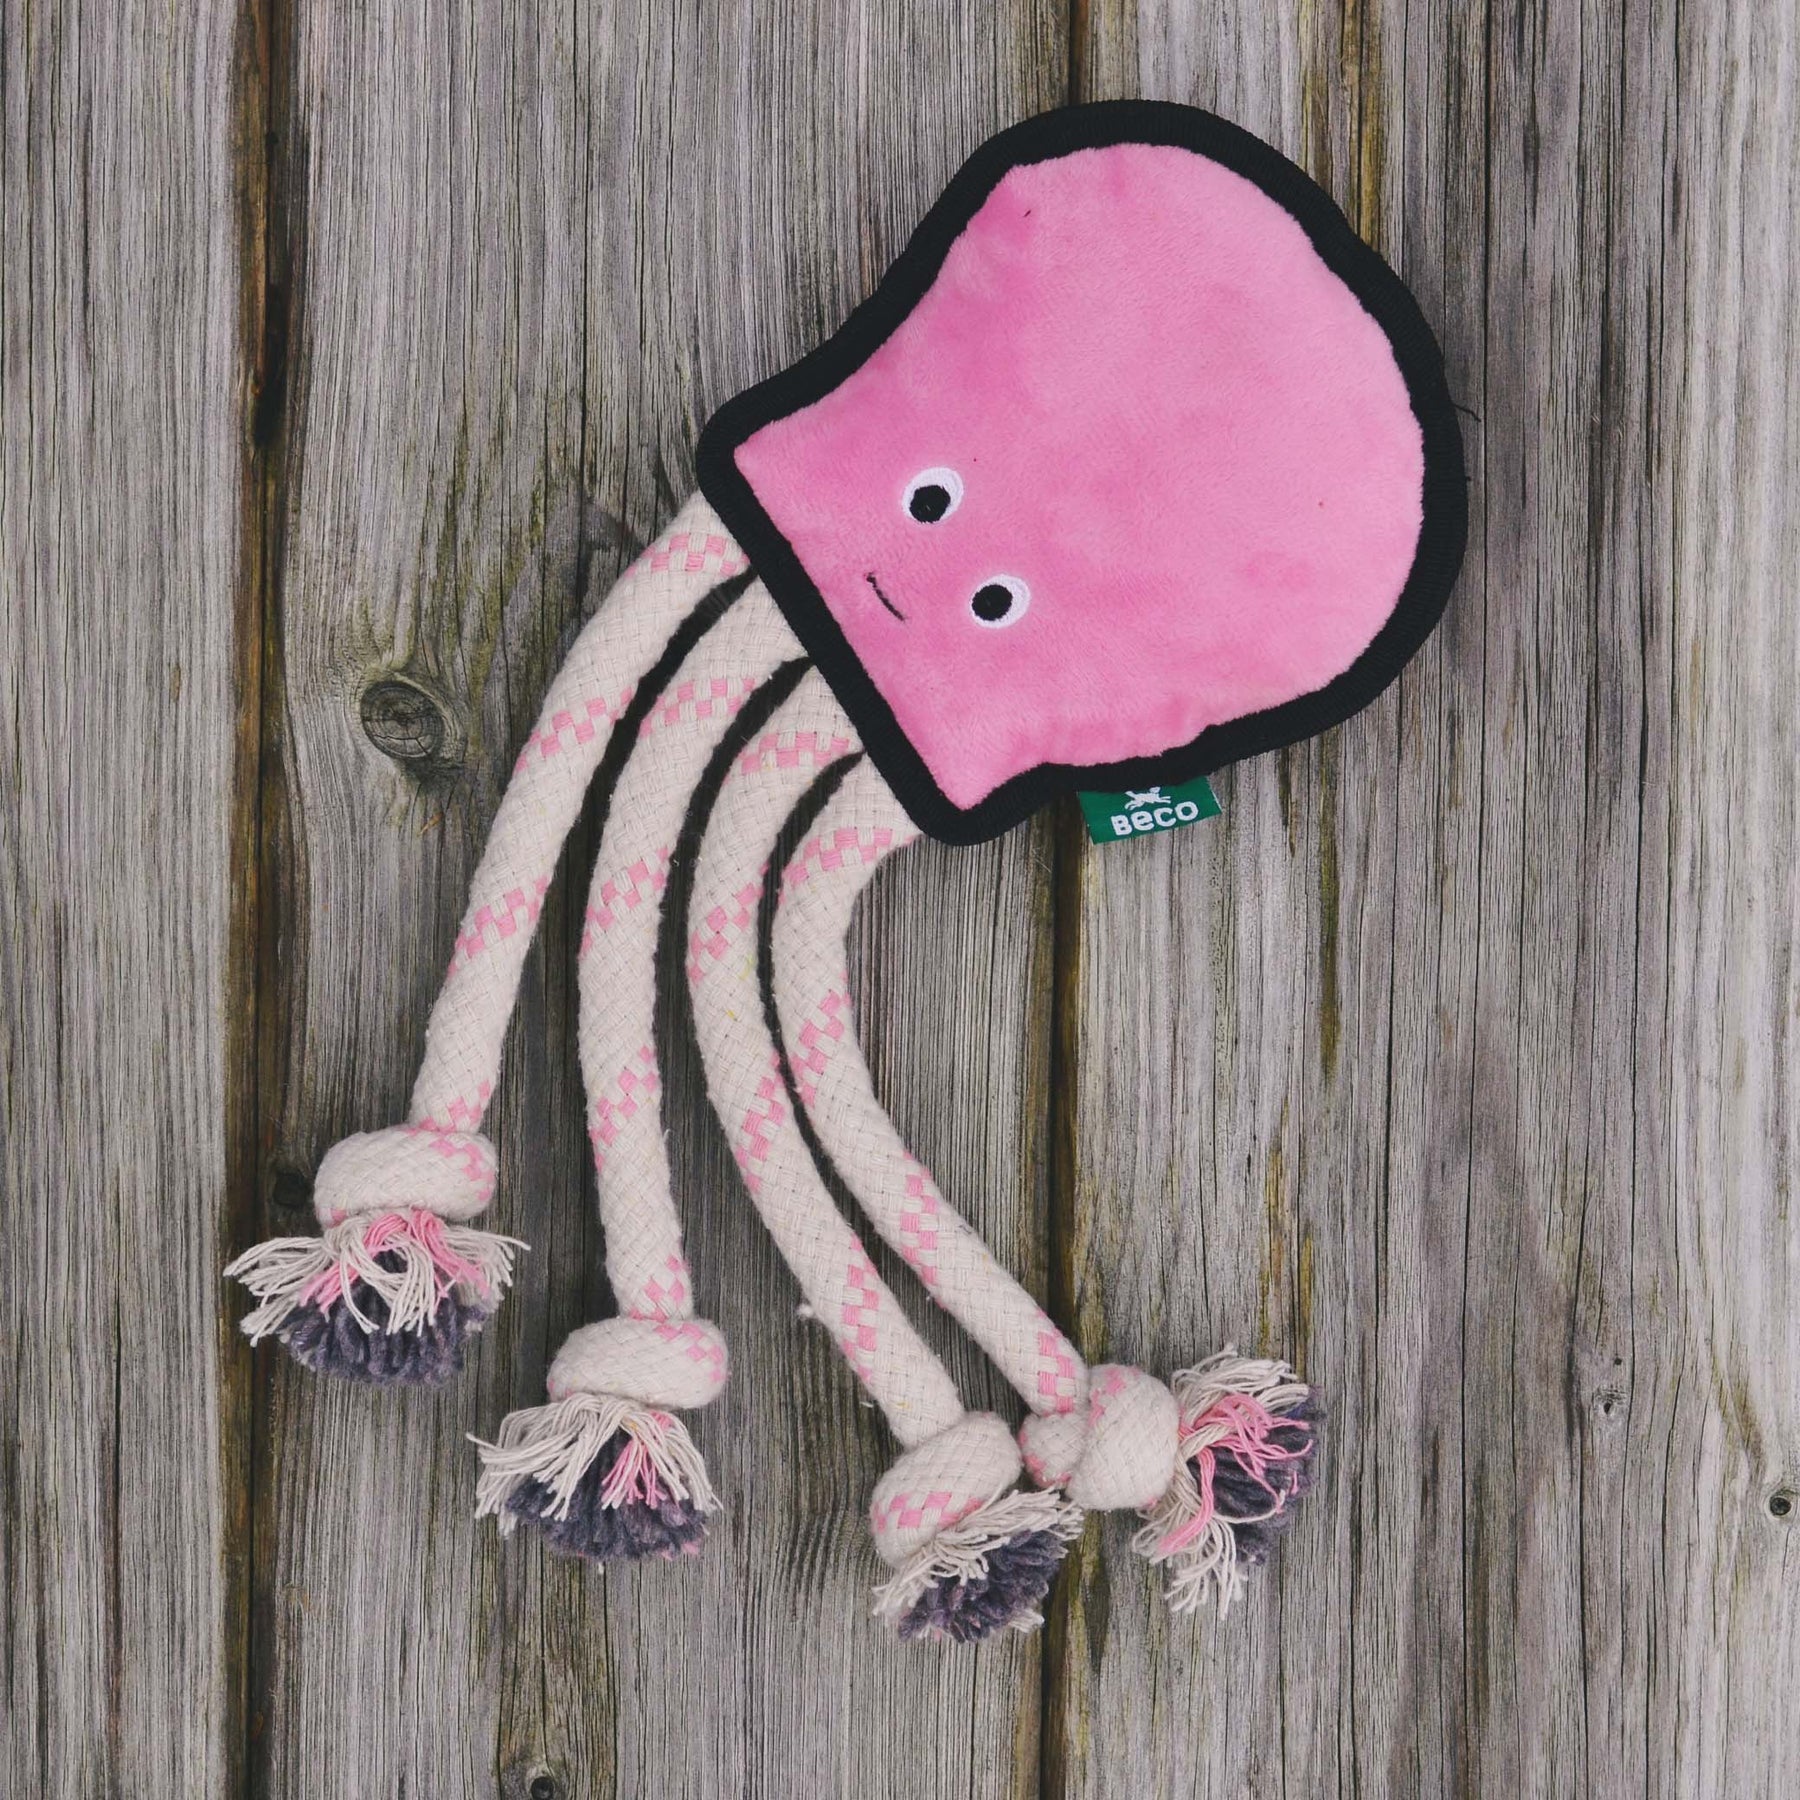 Beco Rough and Tough Recycled Octopus Medium